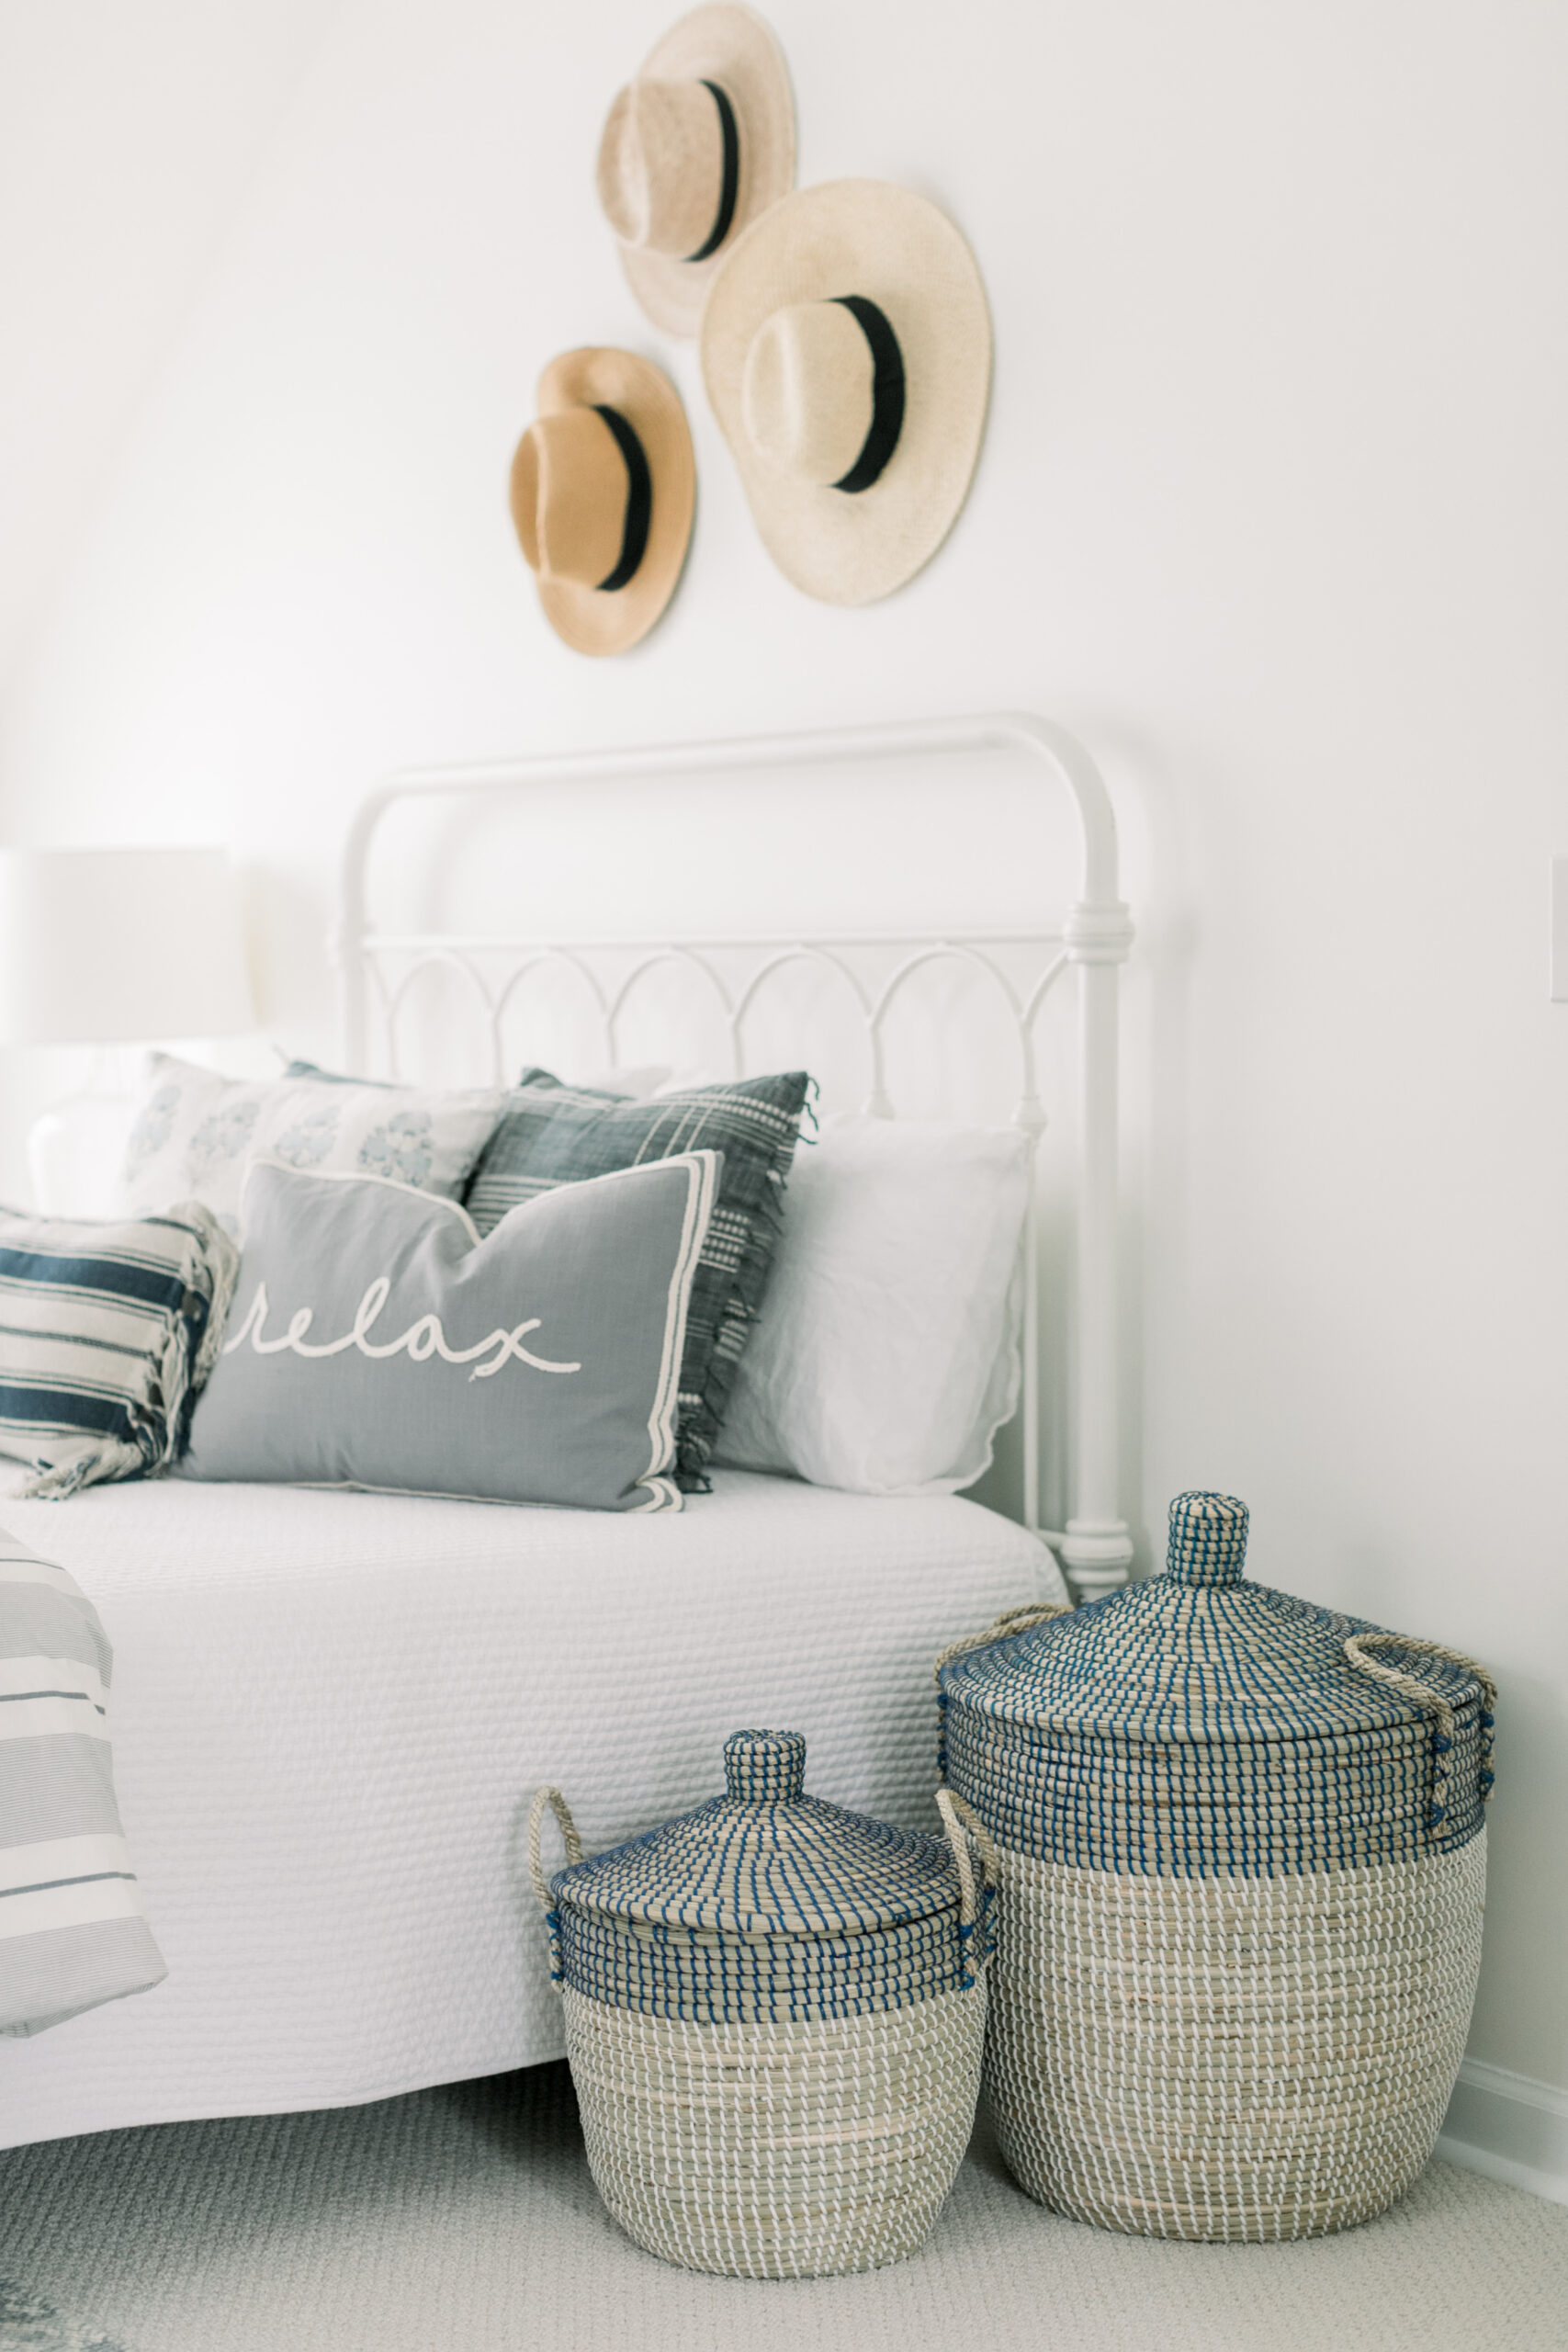 Connecticut life and style blogger Lauren McBride launches her spring 2021 collection with QVC including home and garden products.